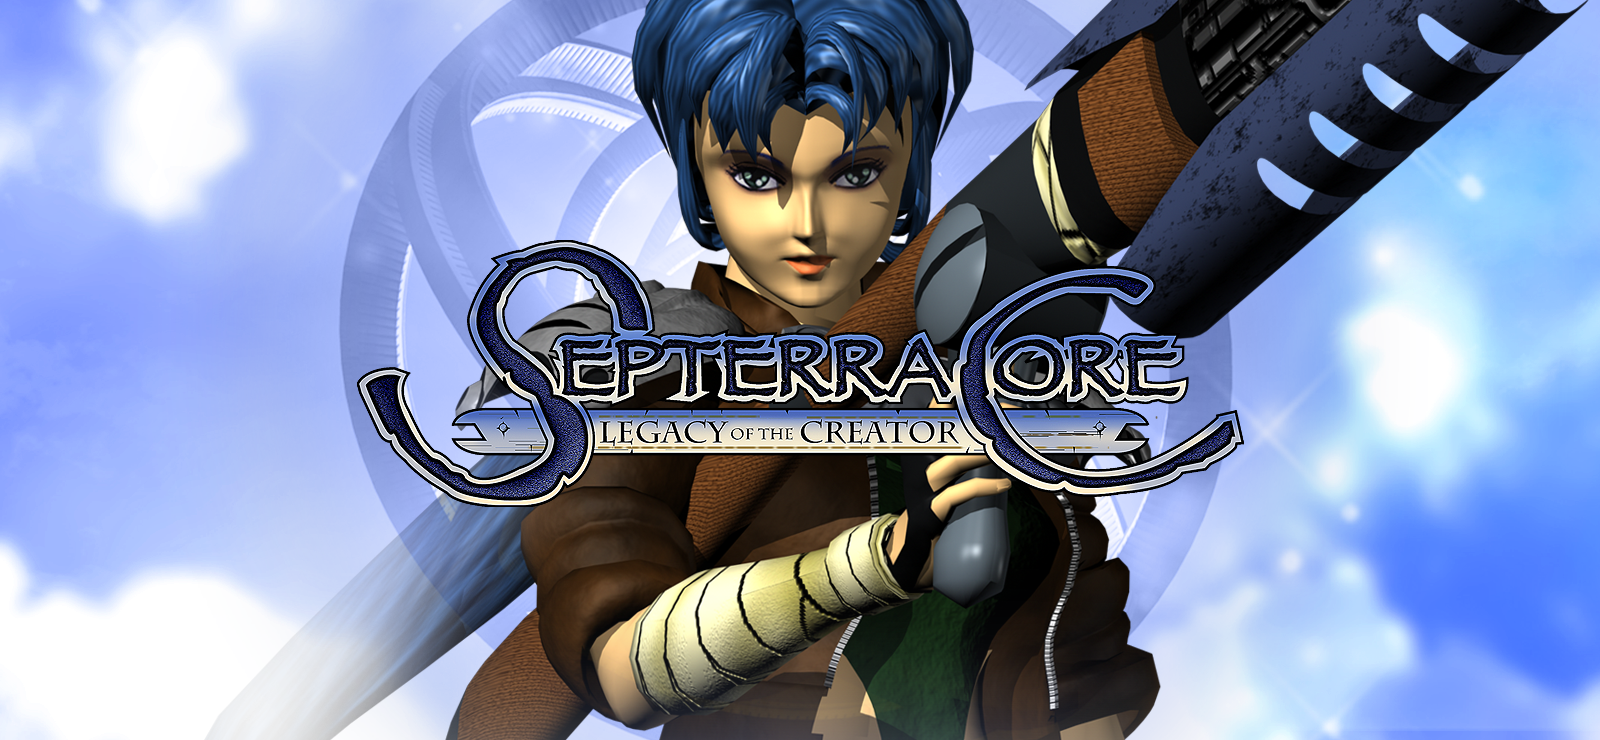 Septerra Core: Legacy Of The Creator